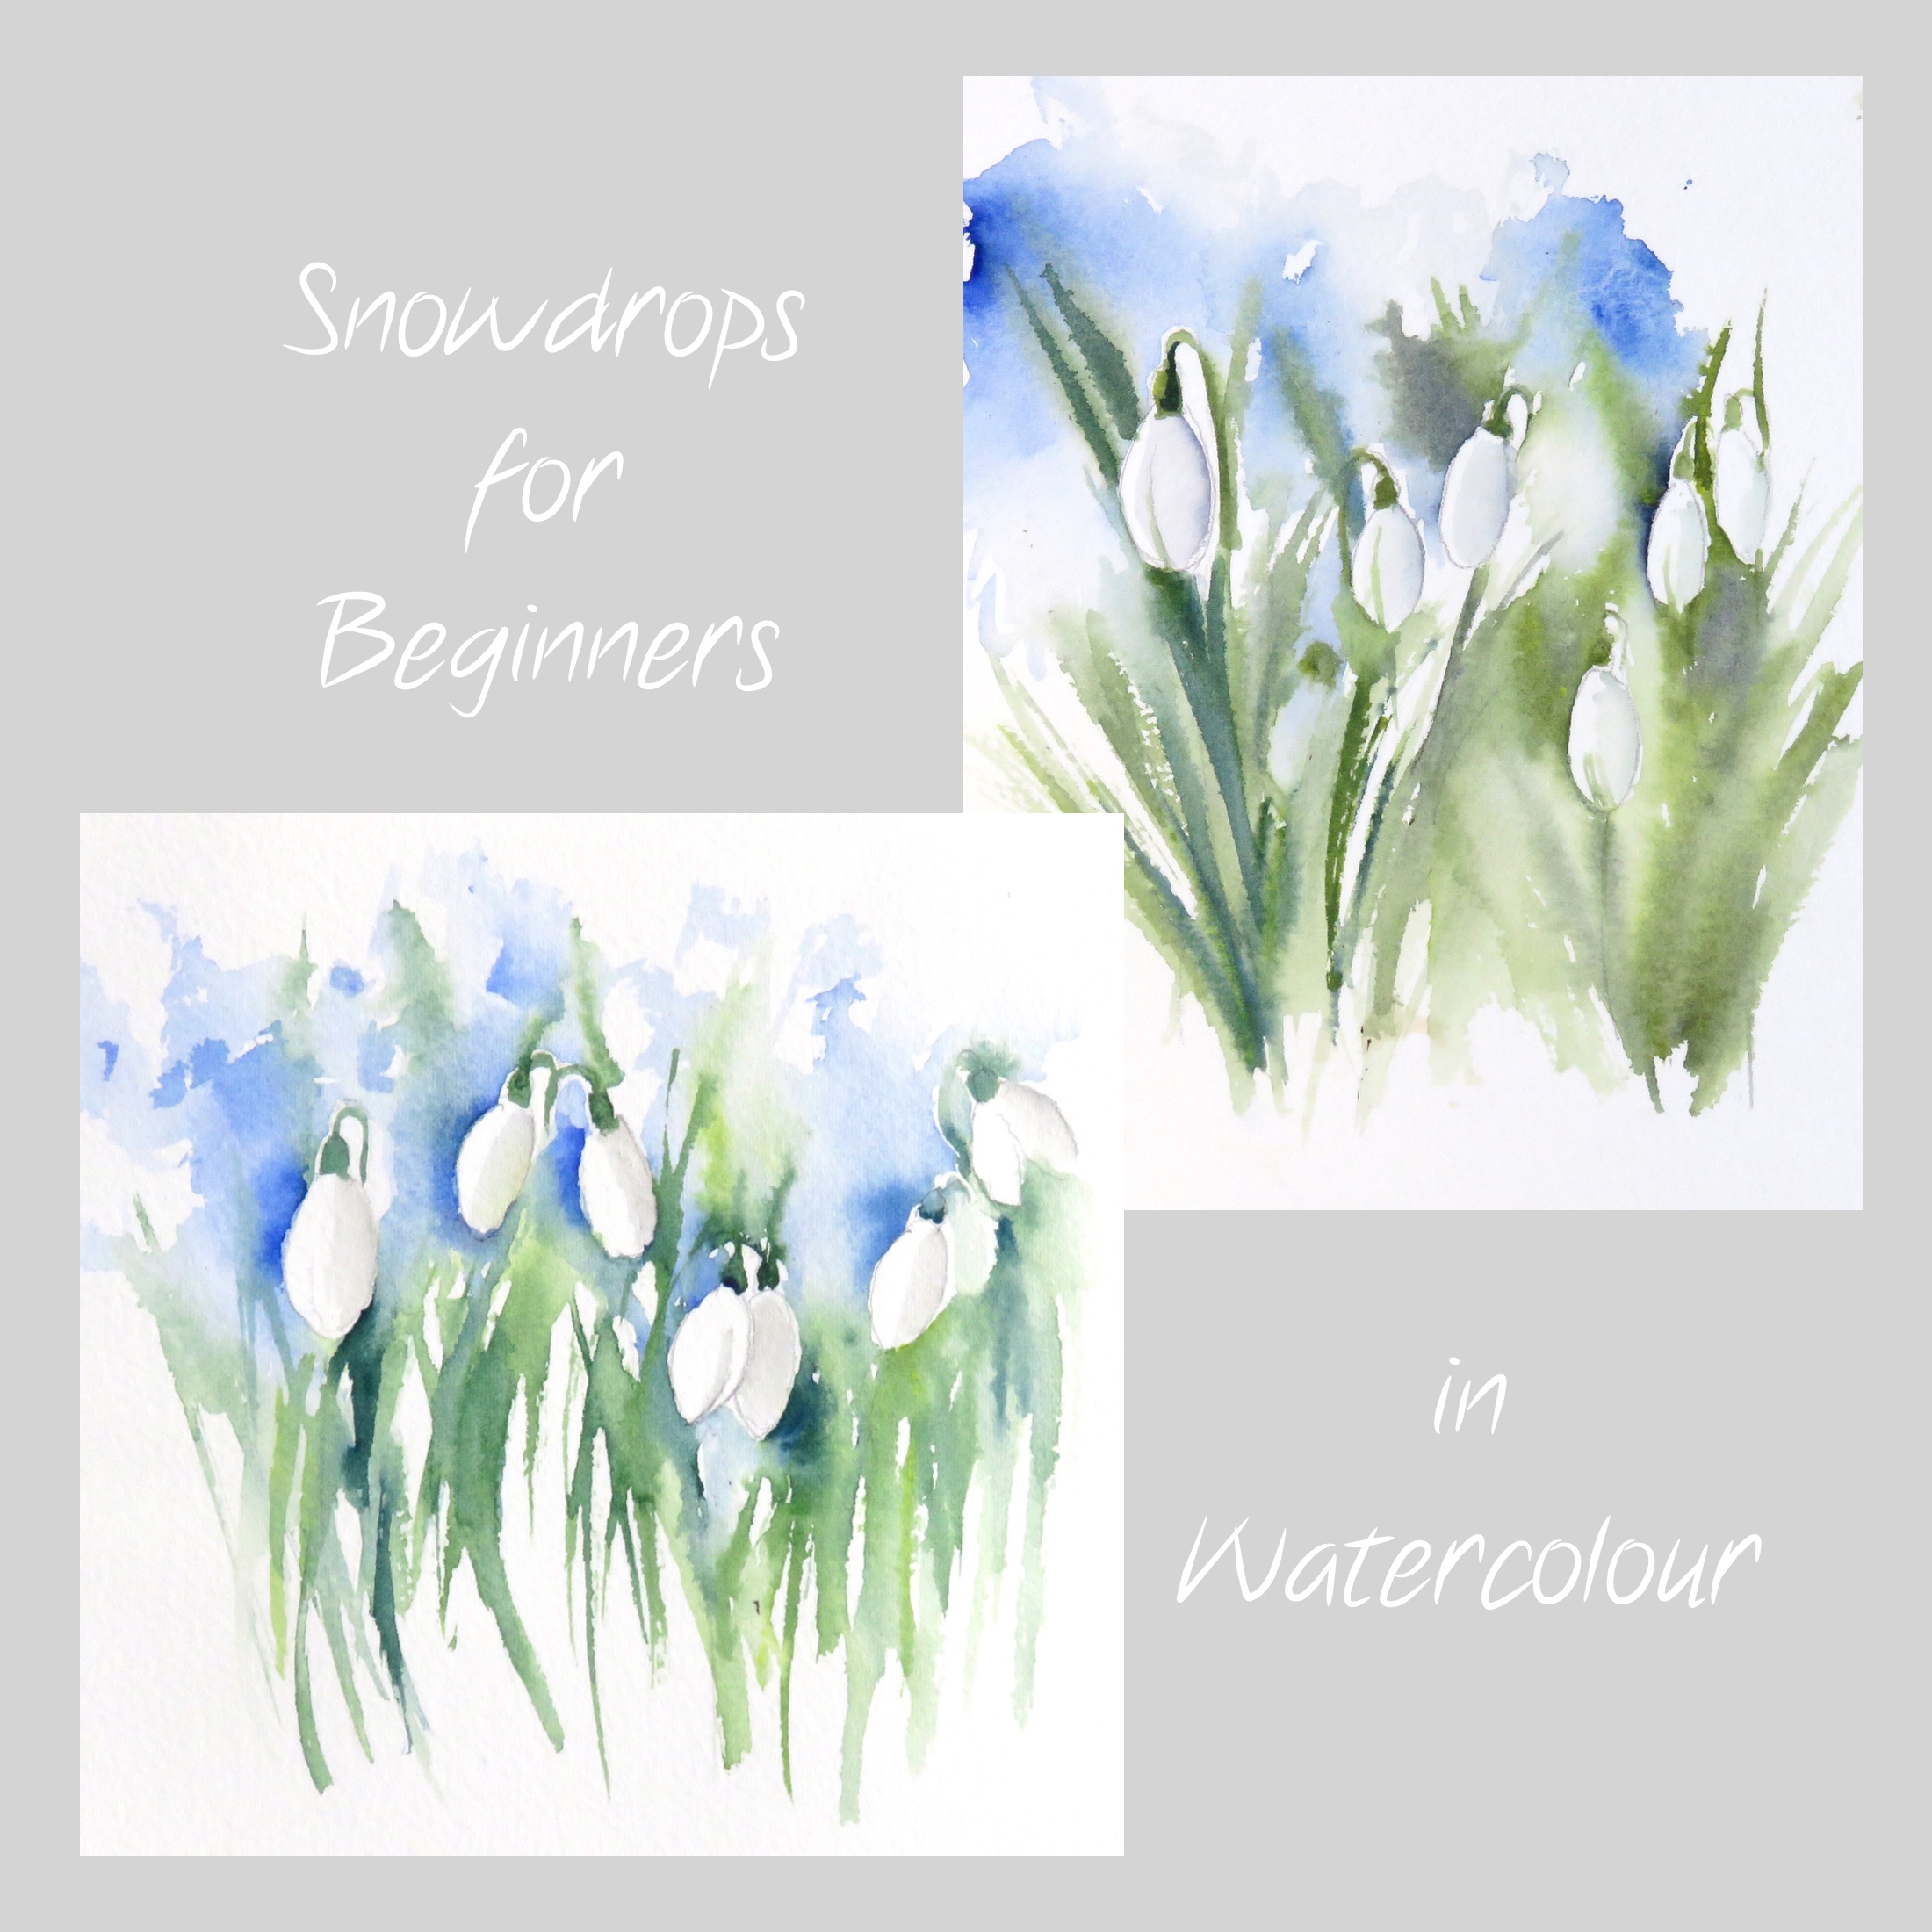 Snowdrops for Beginners – online tuition